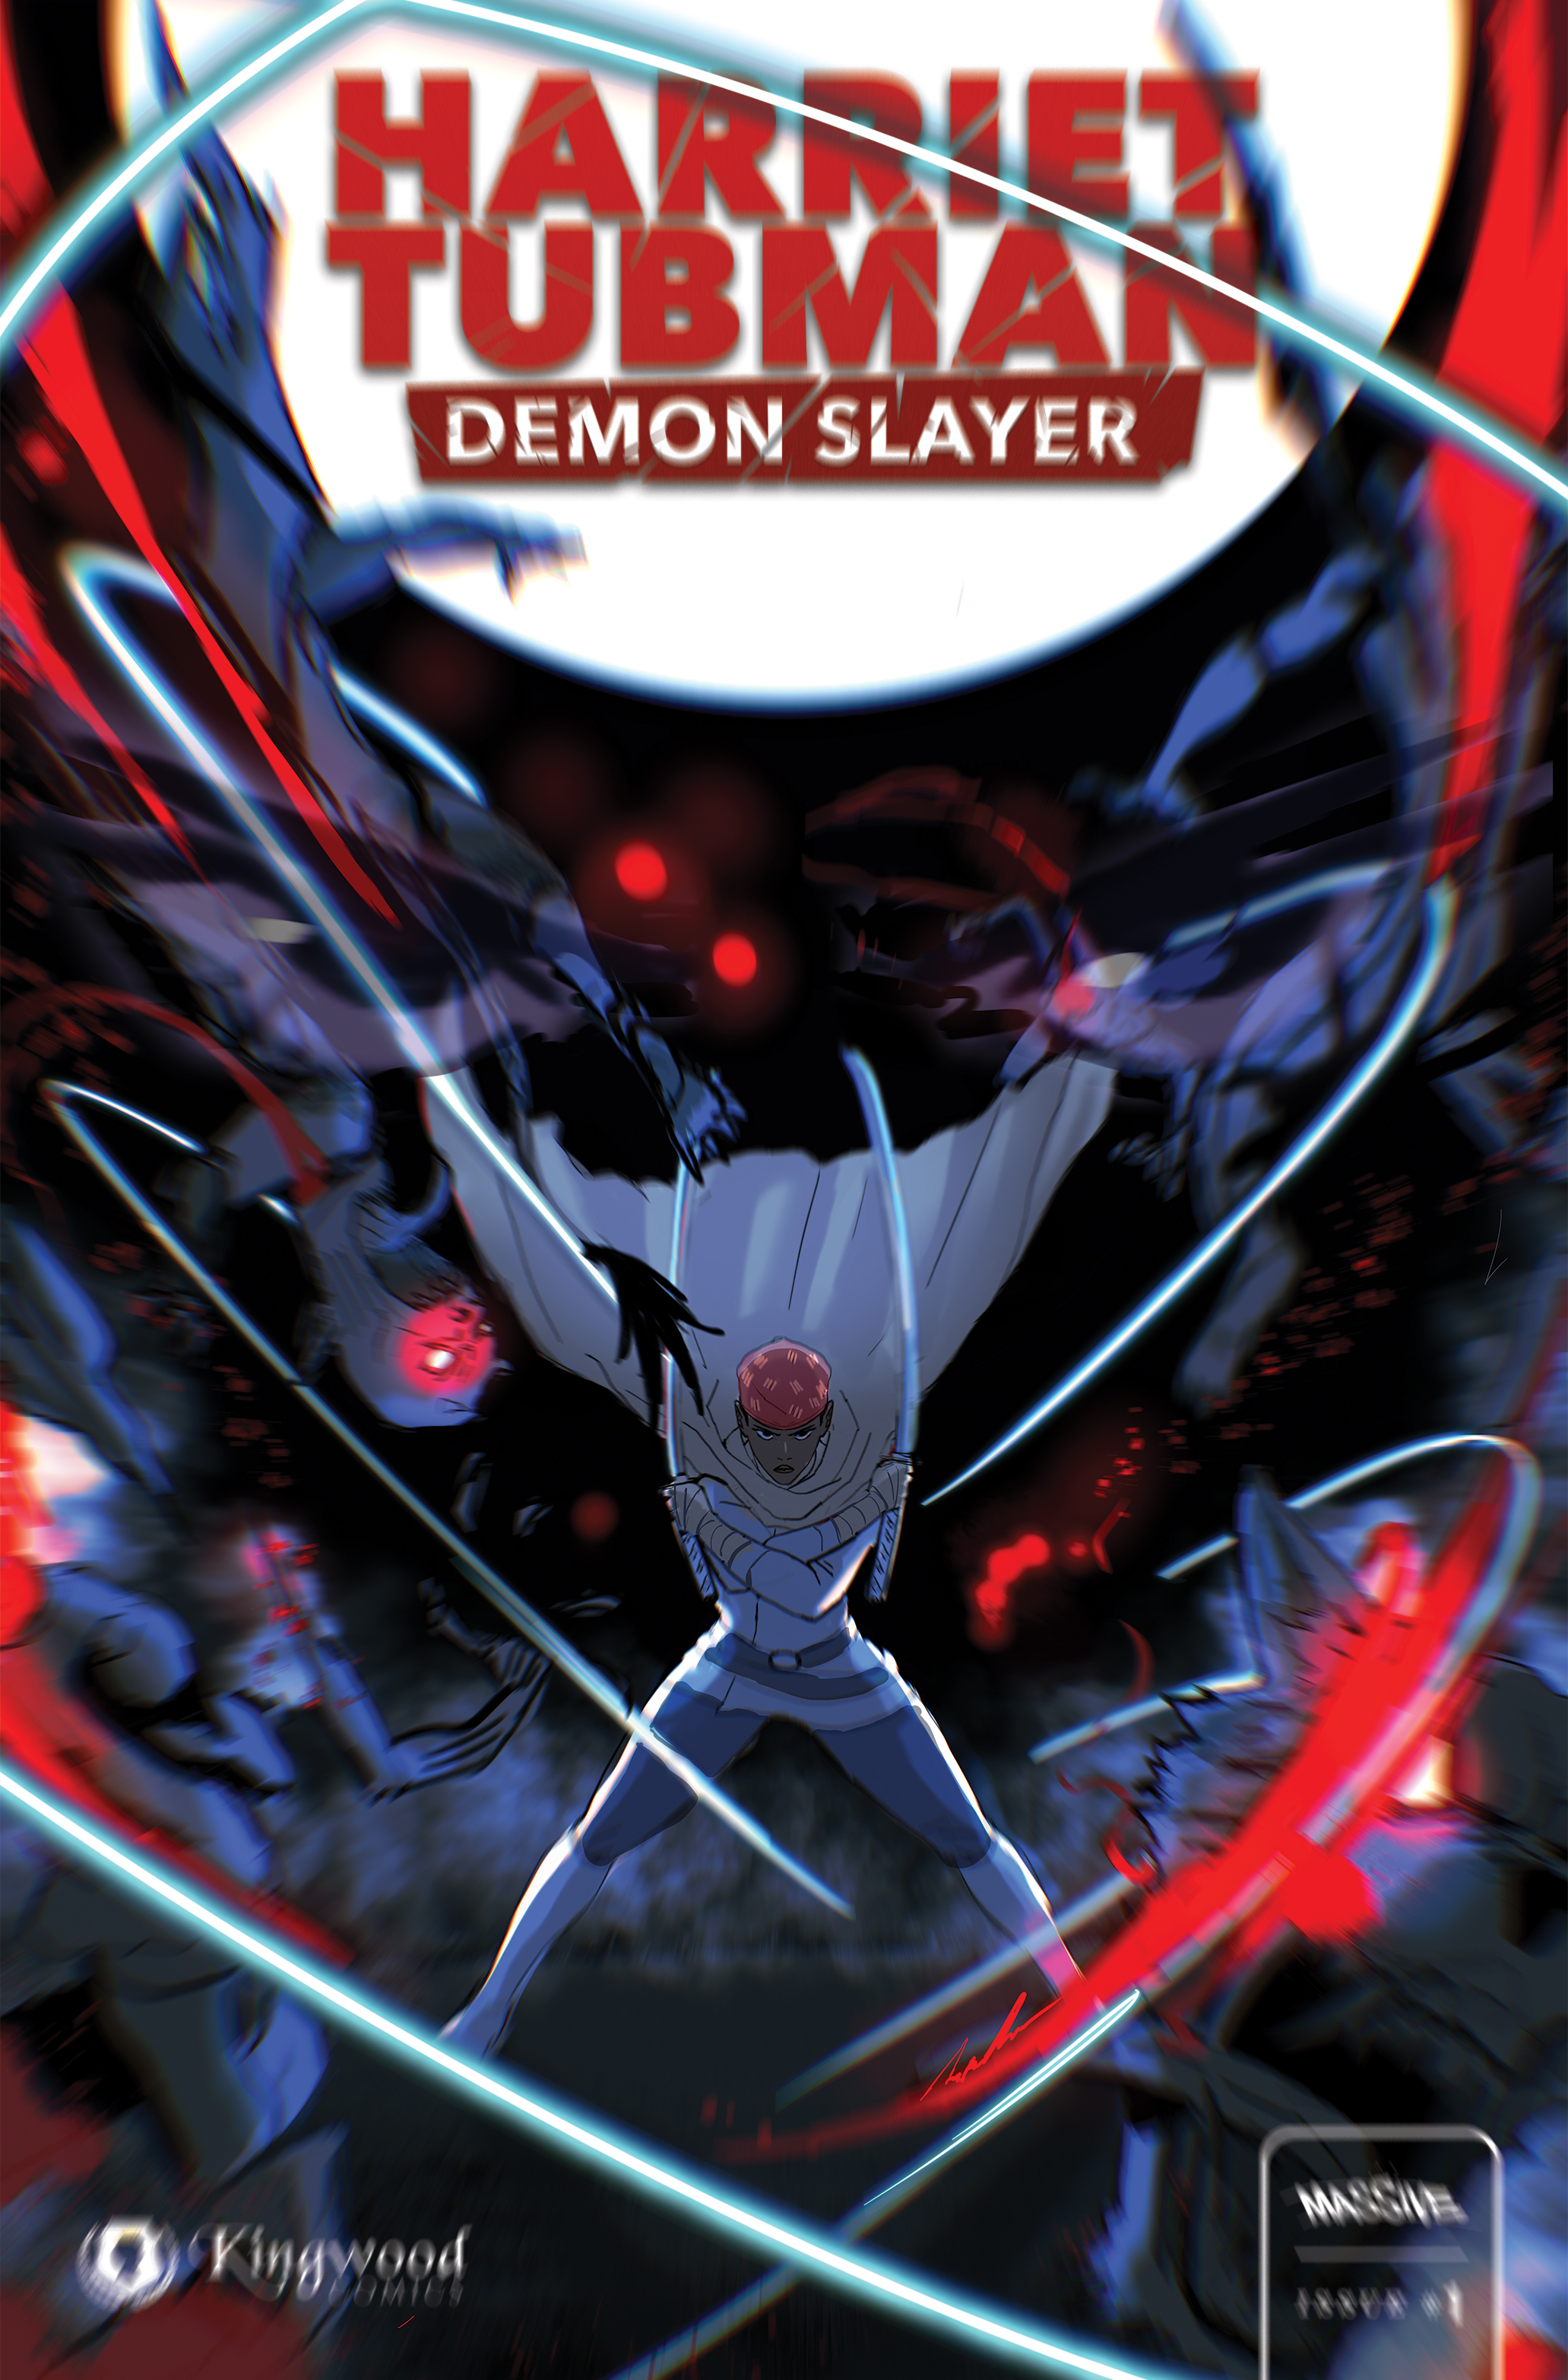 Harriet Tubman Demon Slayer #1 Cover F 1 for 10 Incentive Draper Ivey (Mature)